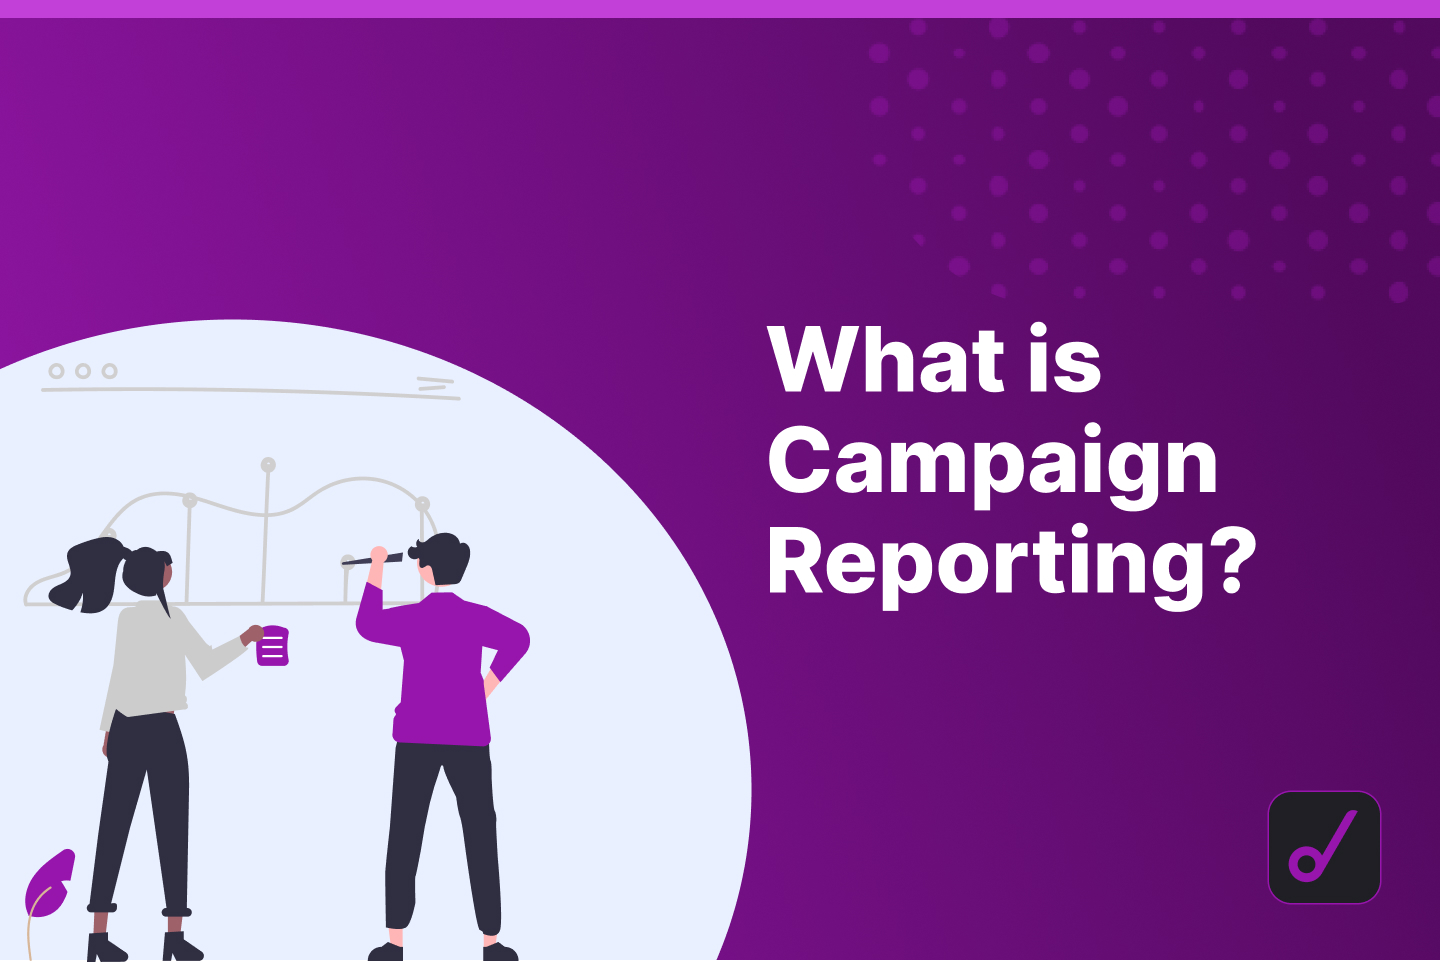 Campaign Reporting: How to Measure the Success of a New Marketing Campaign